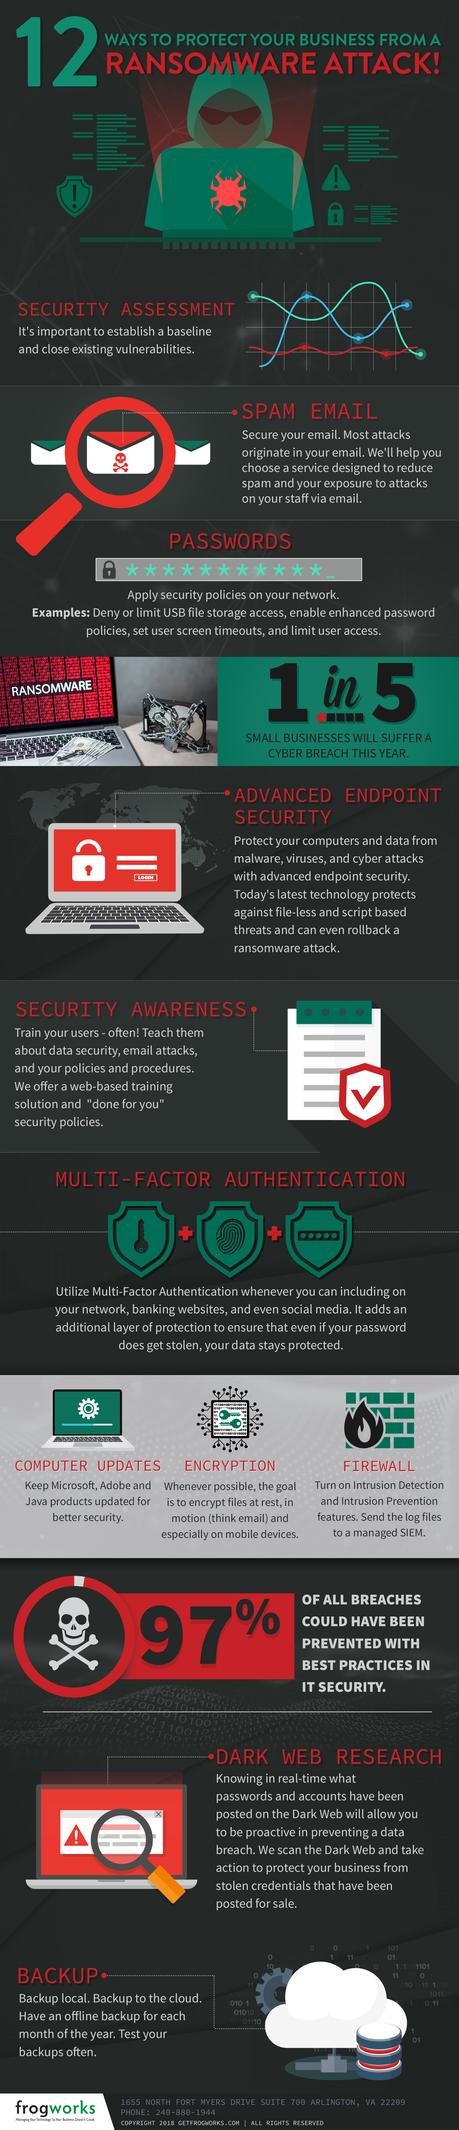 12 Ways to Protect Your Business from a Ransomware Attack!